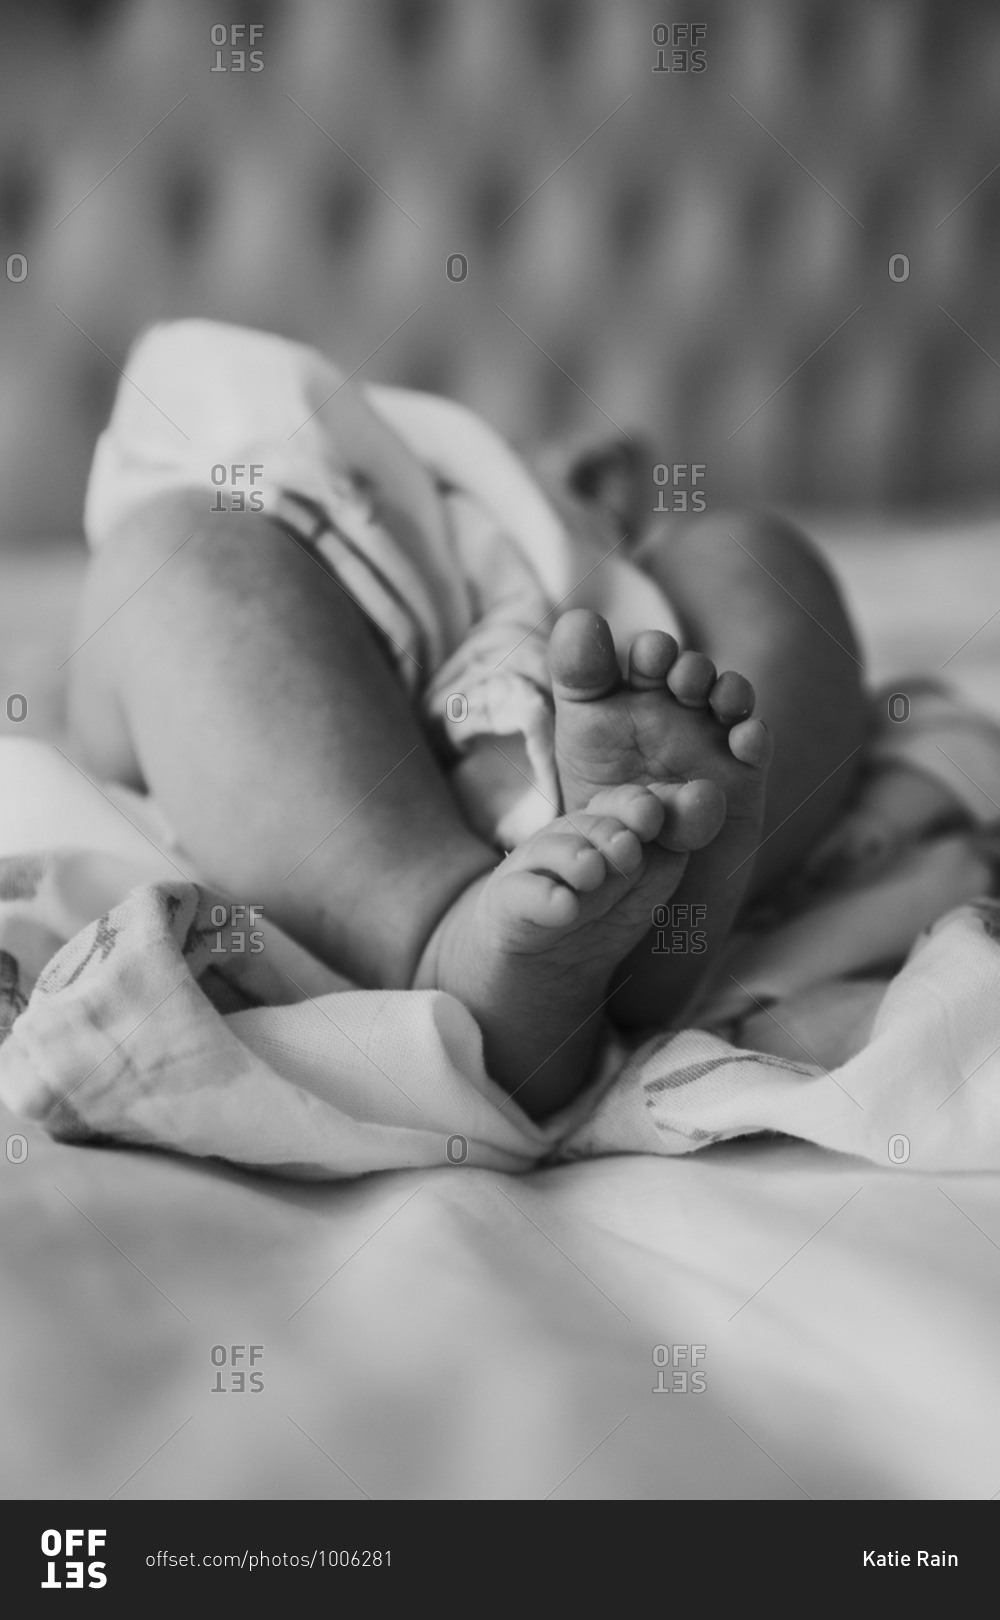 baby-feet-and-legs-wrapped-around-sheets-in-black-and-white-stock-photo